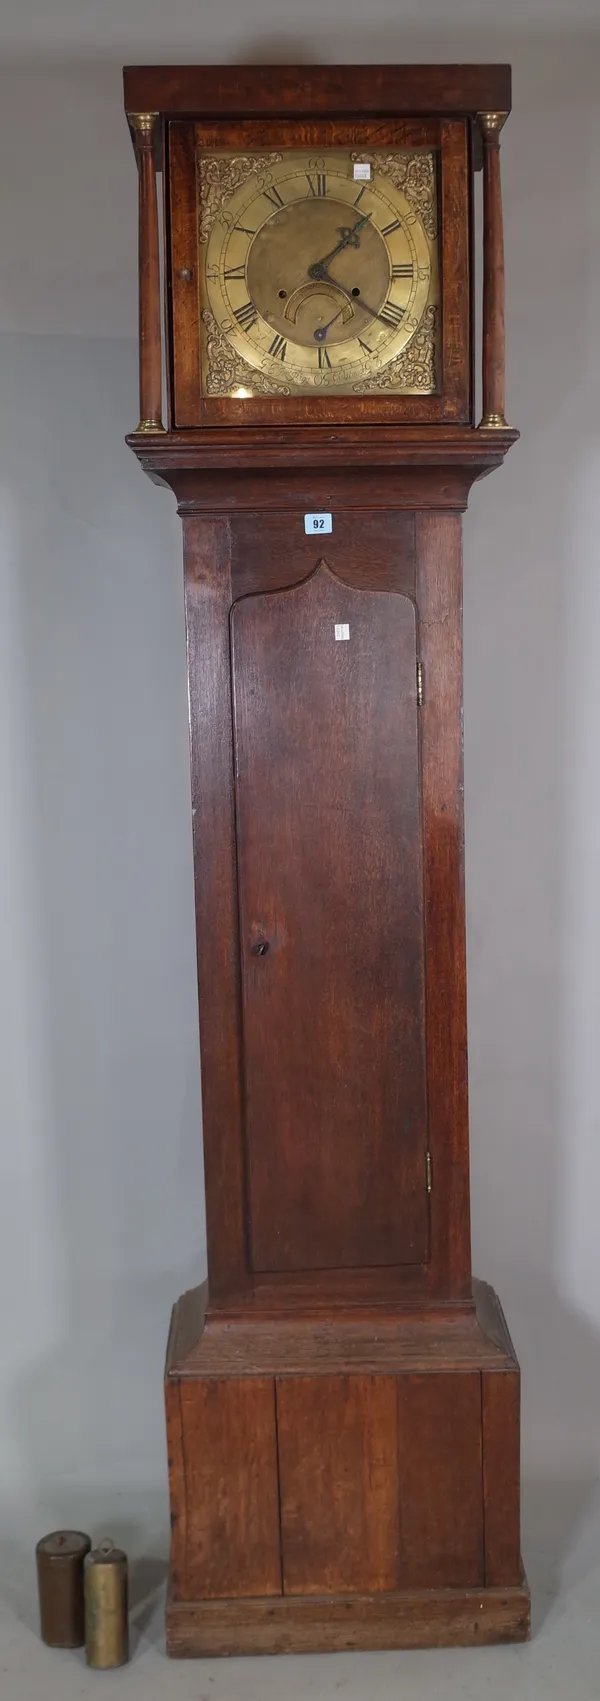 Jno Rigg Gisbrough; an early 18th century oak longcase clock, with thirty hour movement, 185cm high x 42cm wide, (case with alterations).